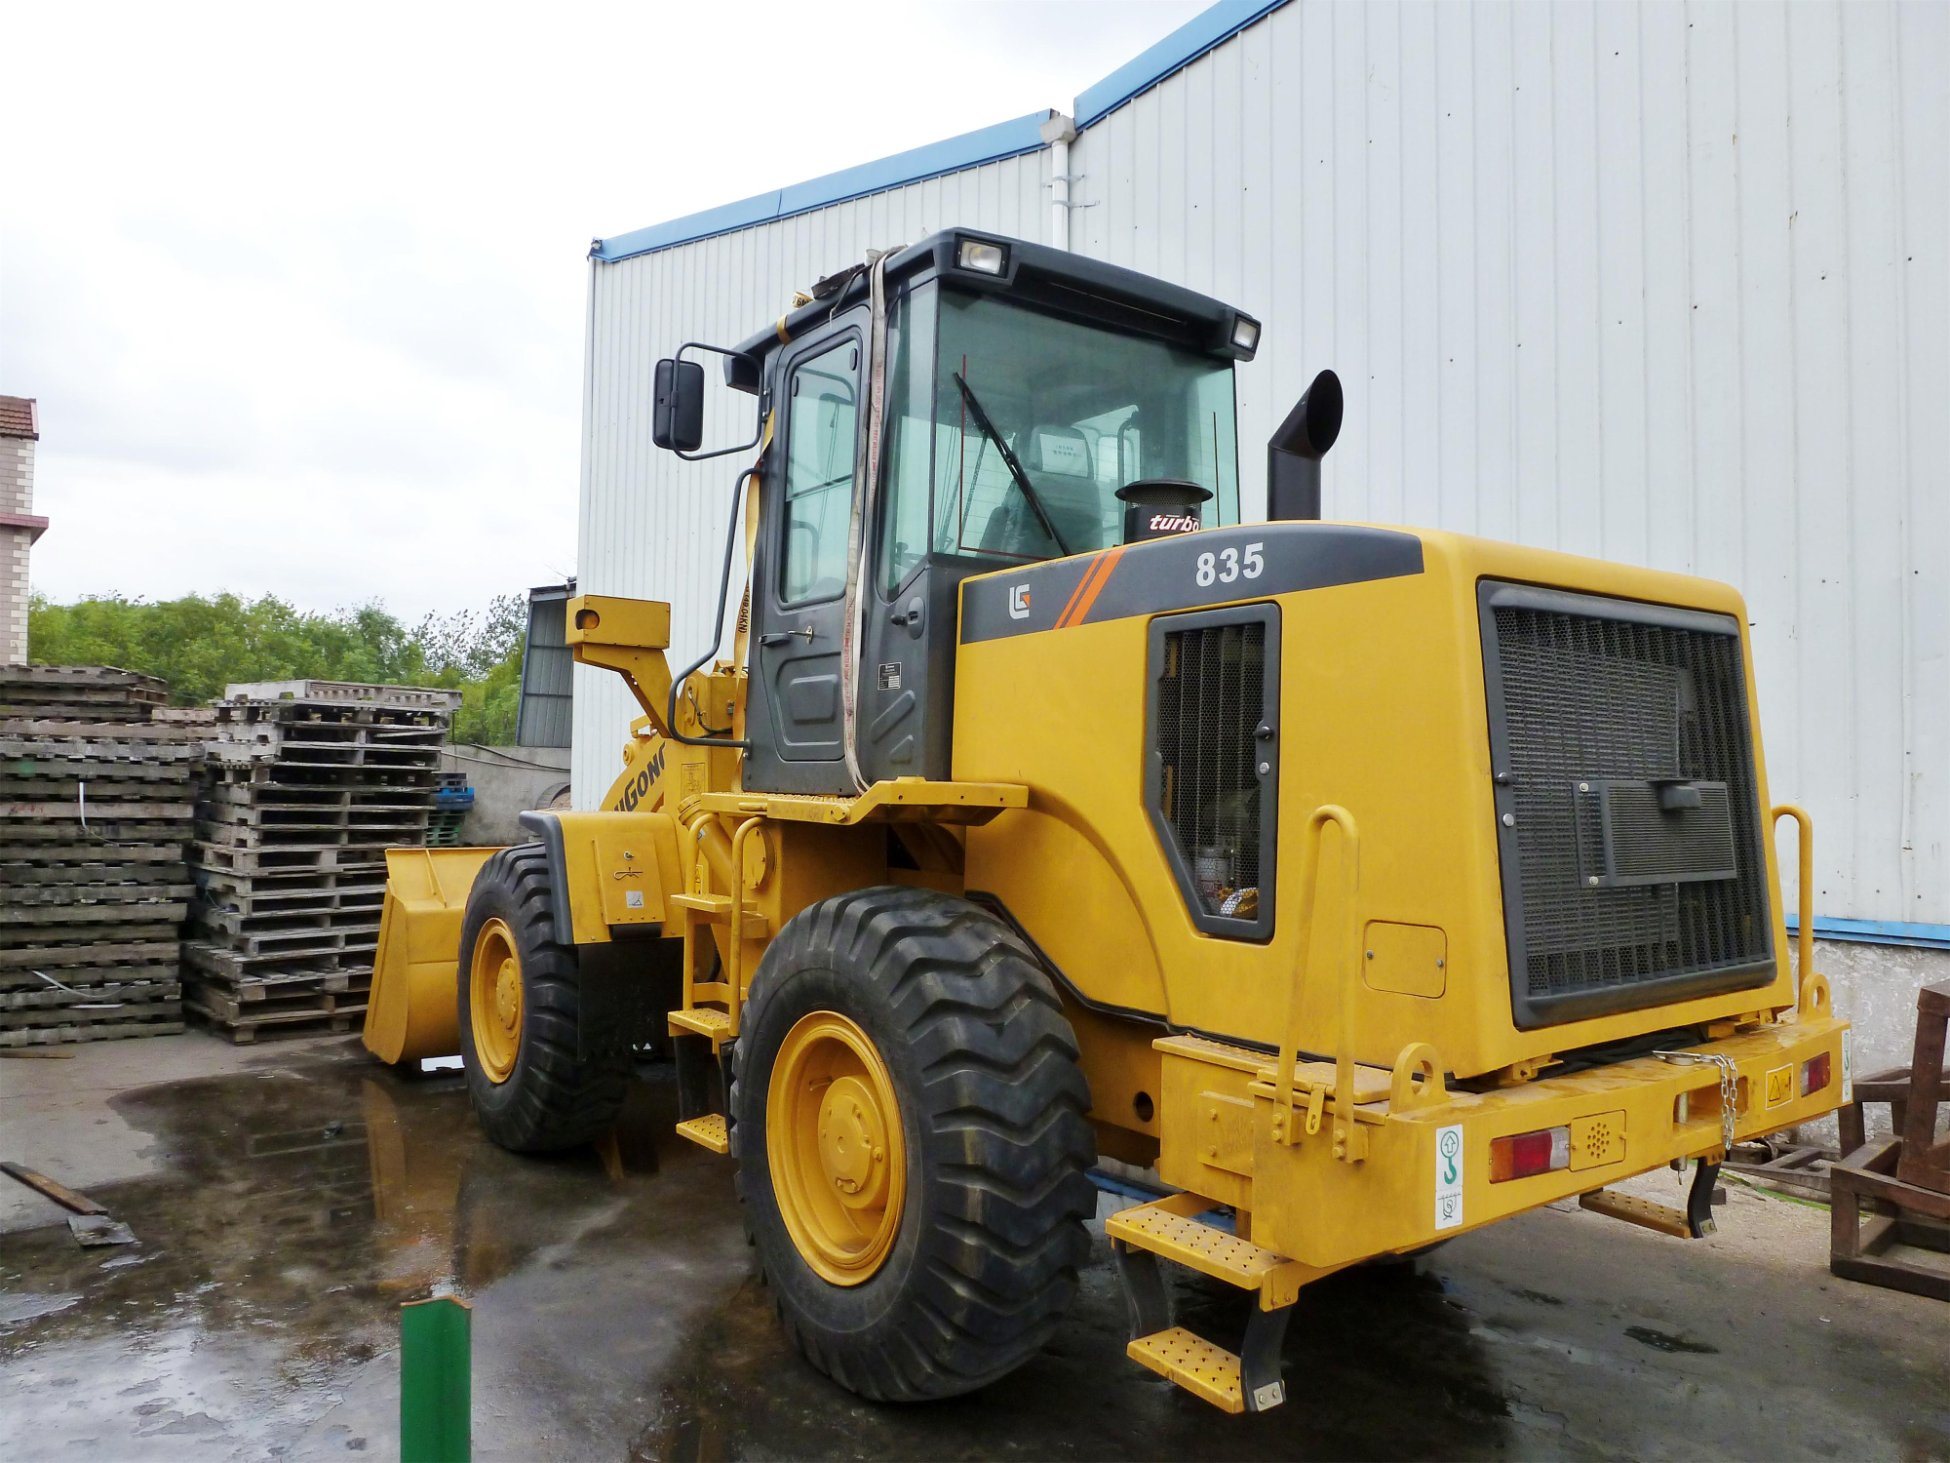 Liugong 3ton Small Wheel Loader 835h with Forks